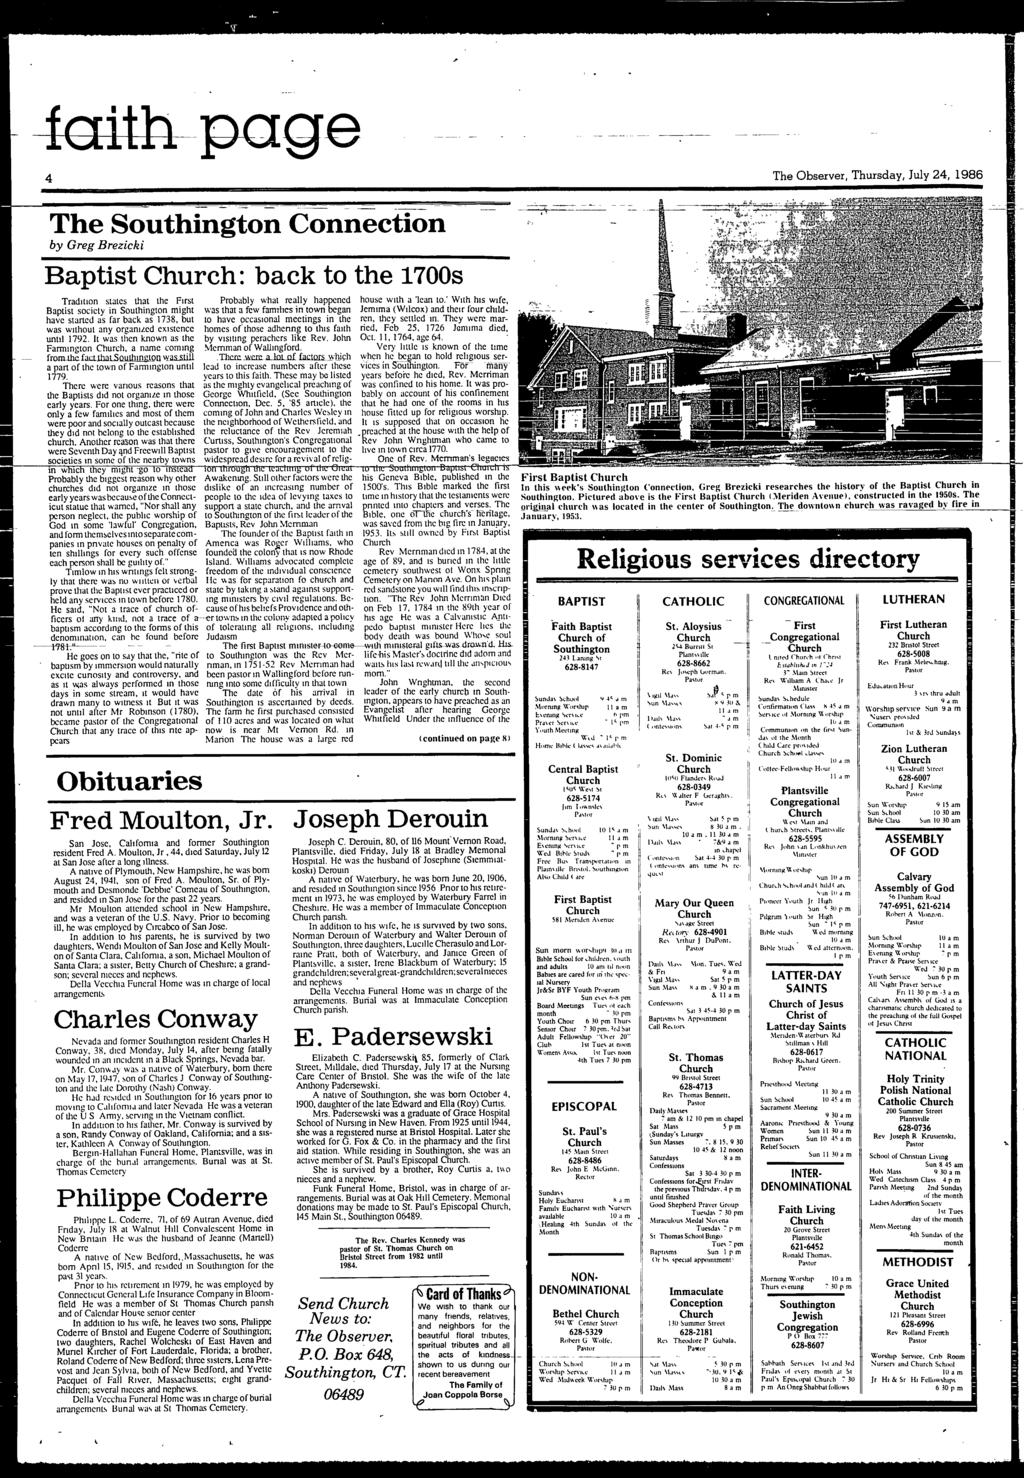 l( ith- p ge 4 The Observer, Thursday, July 24, 1986 The South ngton C nnection by Greg Brezicki Baptist : back to the 1700s Tradition states that the First Baptist society in Southington might have